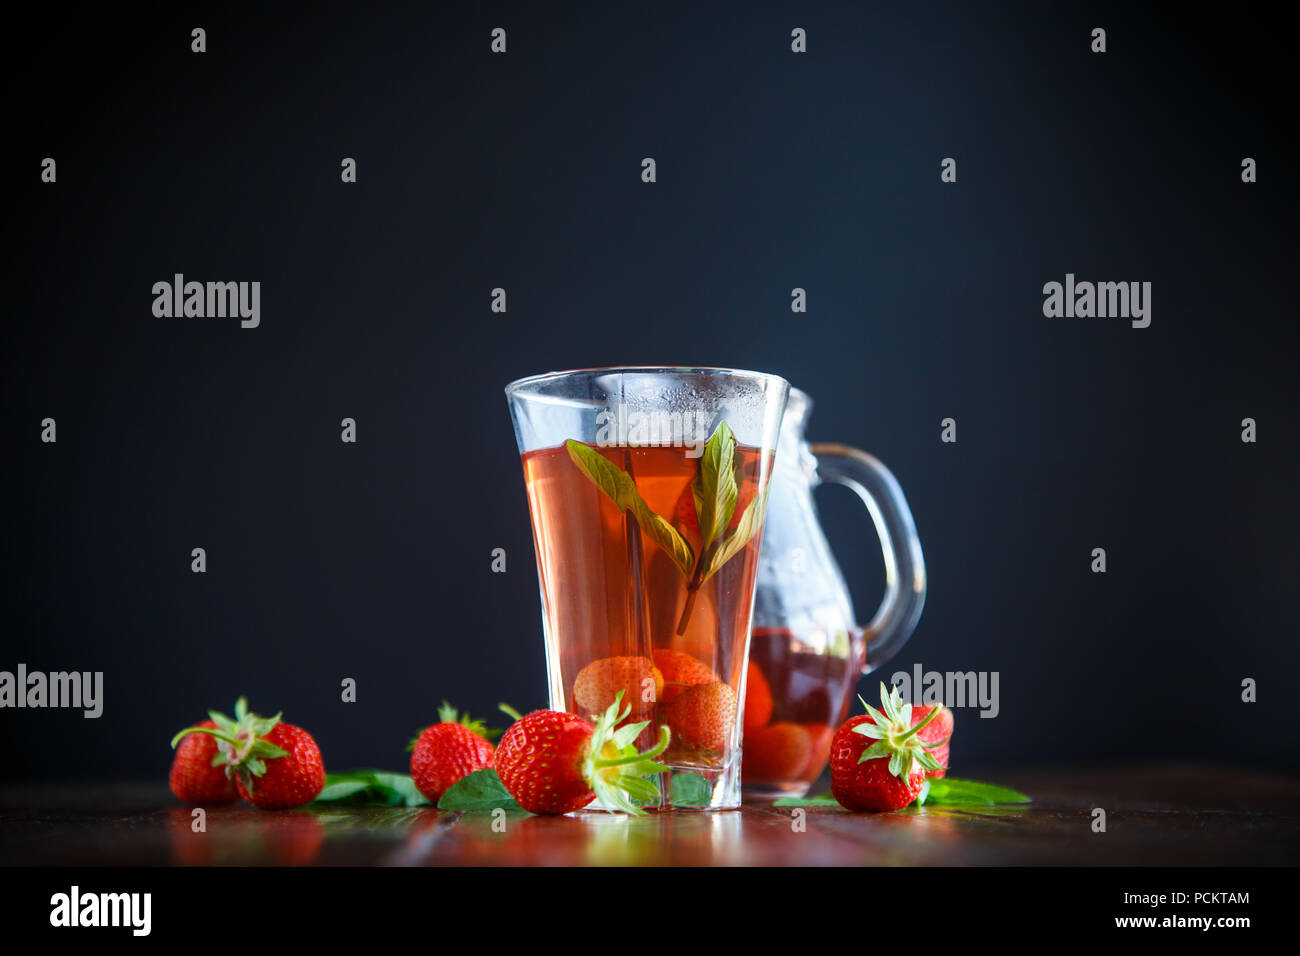 Sweet compote of ripe red strawberries in a glass decanter Stock Photo